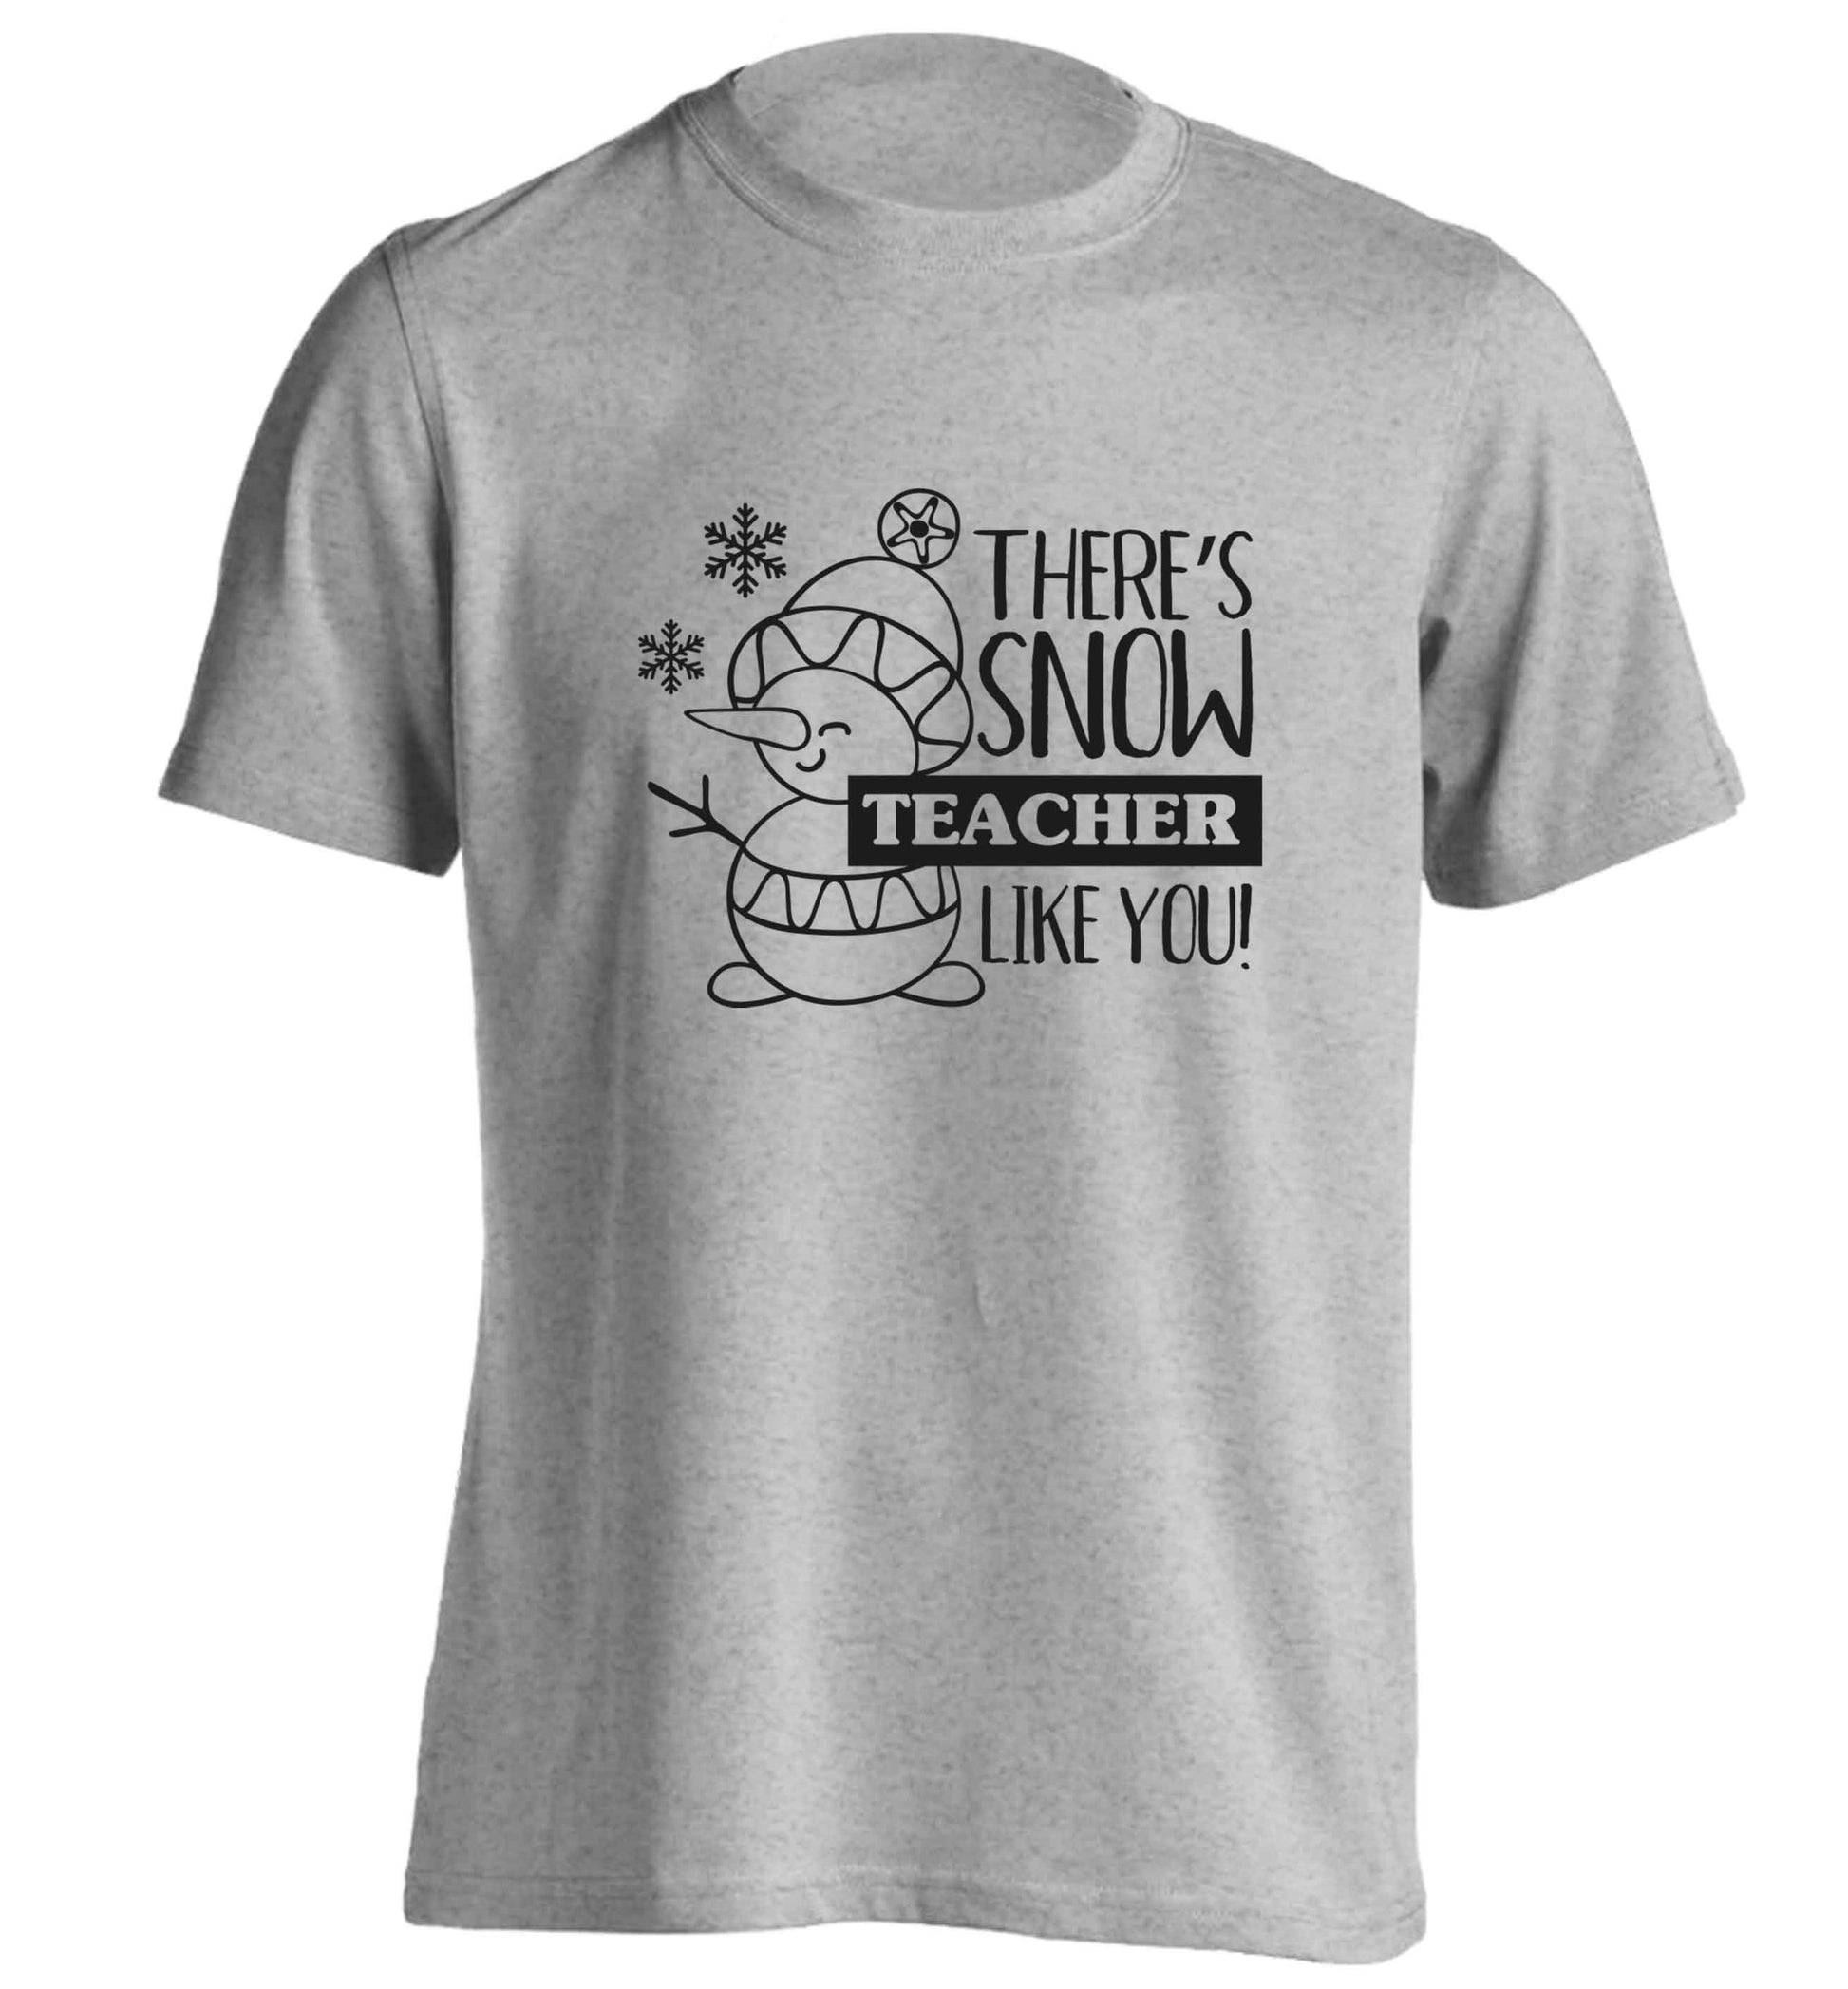 There's snow teacher like you adults unisex grey Tshirt 2XL